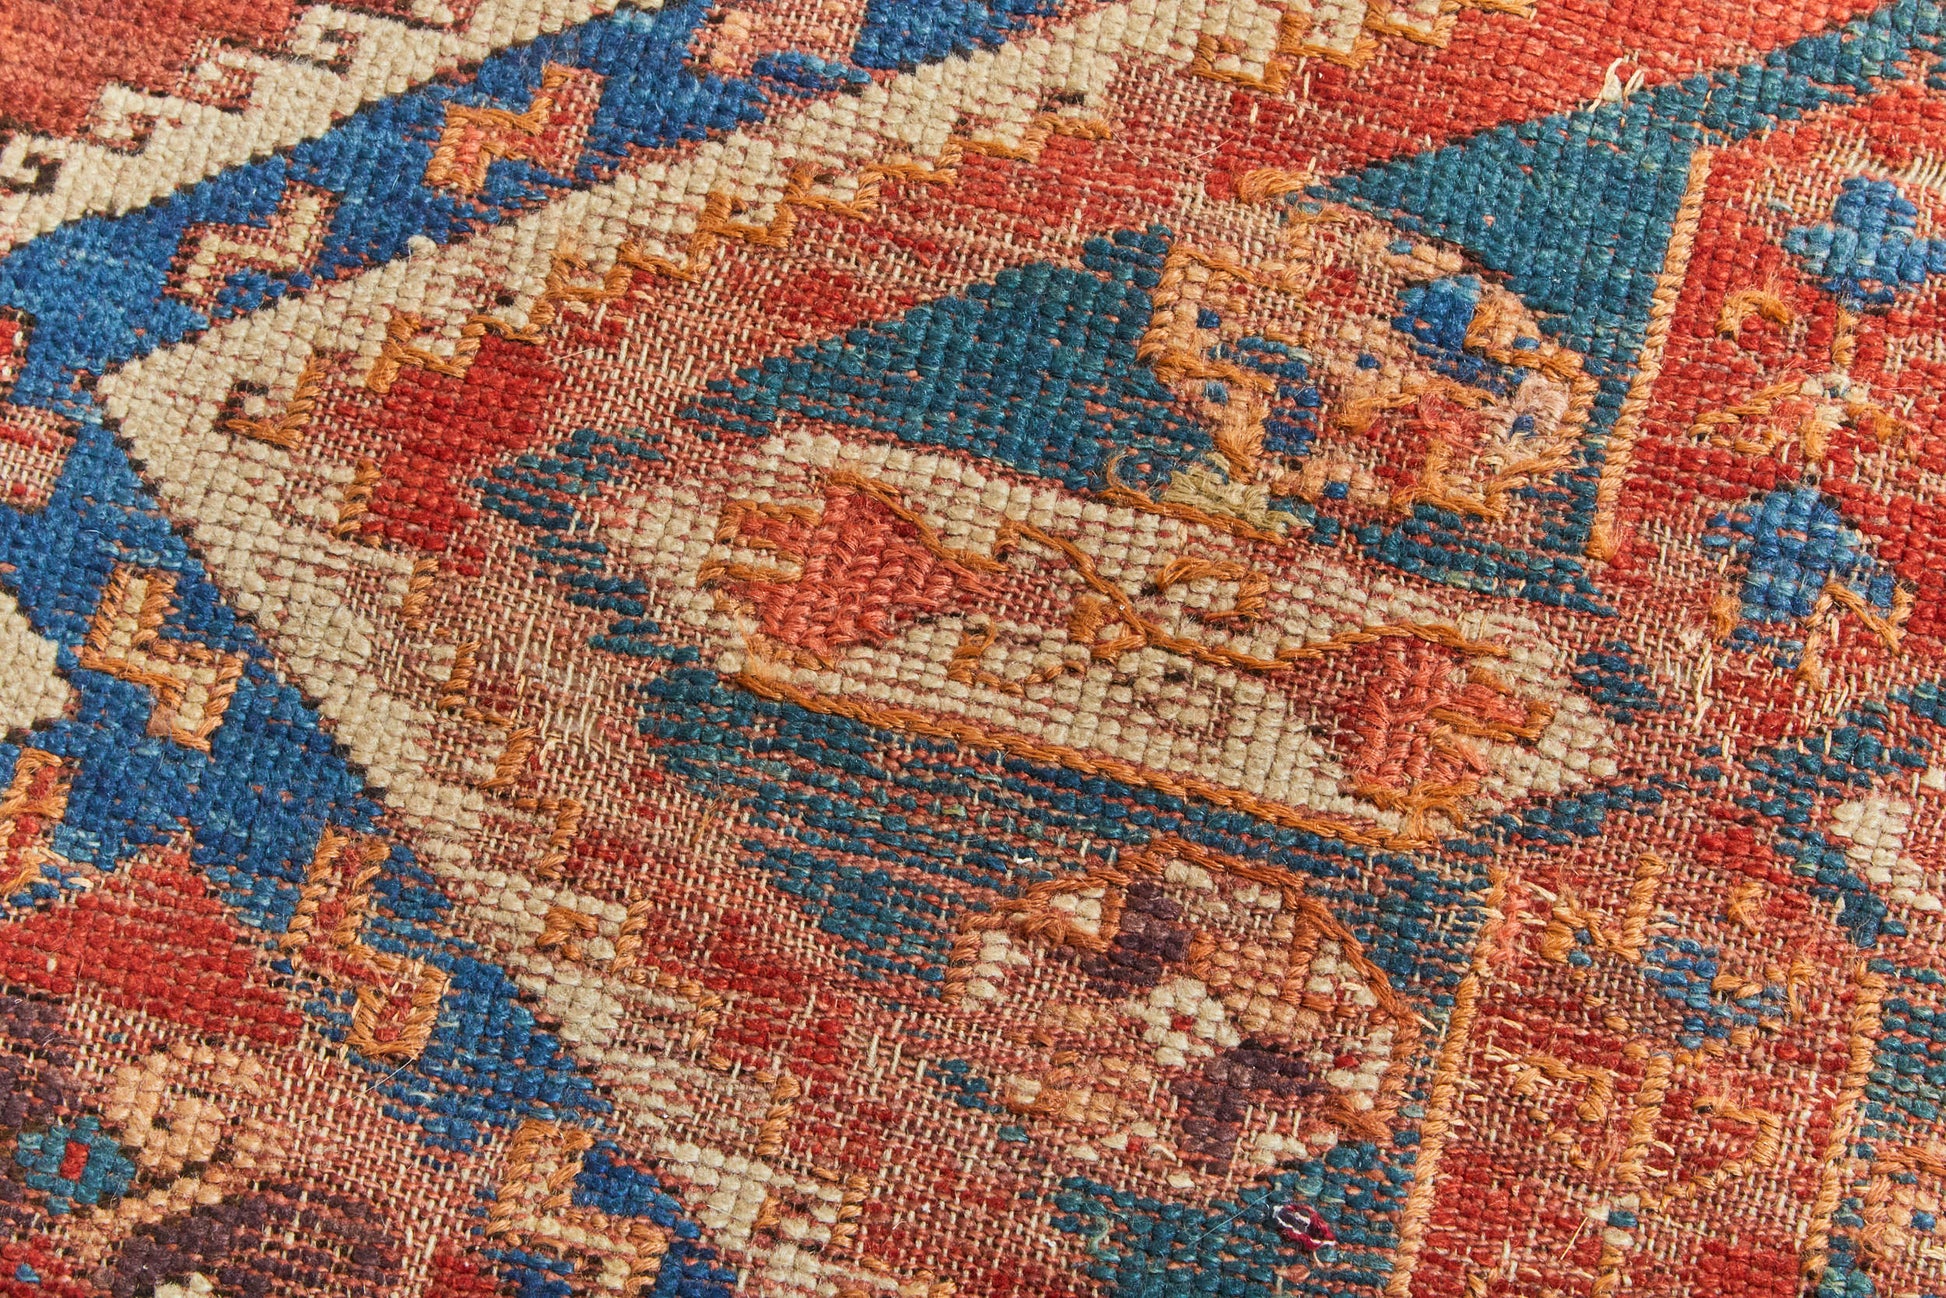 Antique hand woven Persian Rug, Caucasian Rug - Red, cream and blue weaving with crosses, medallions and zigzags available from King Kennedy Rugs Los Angeles